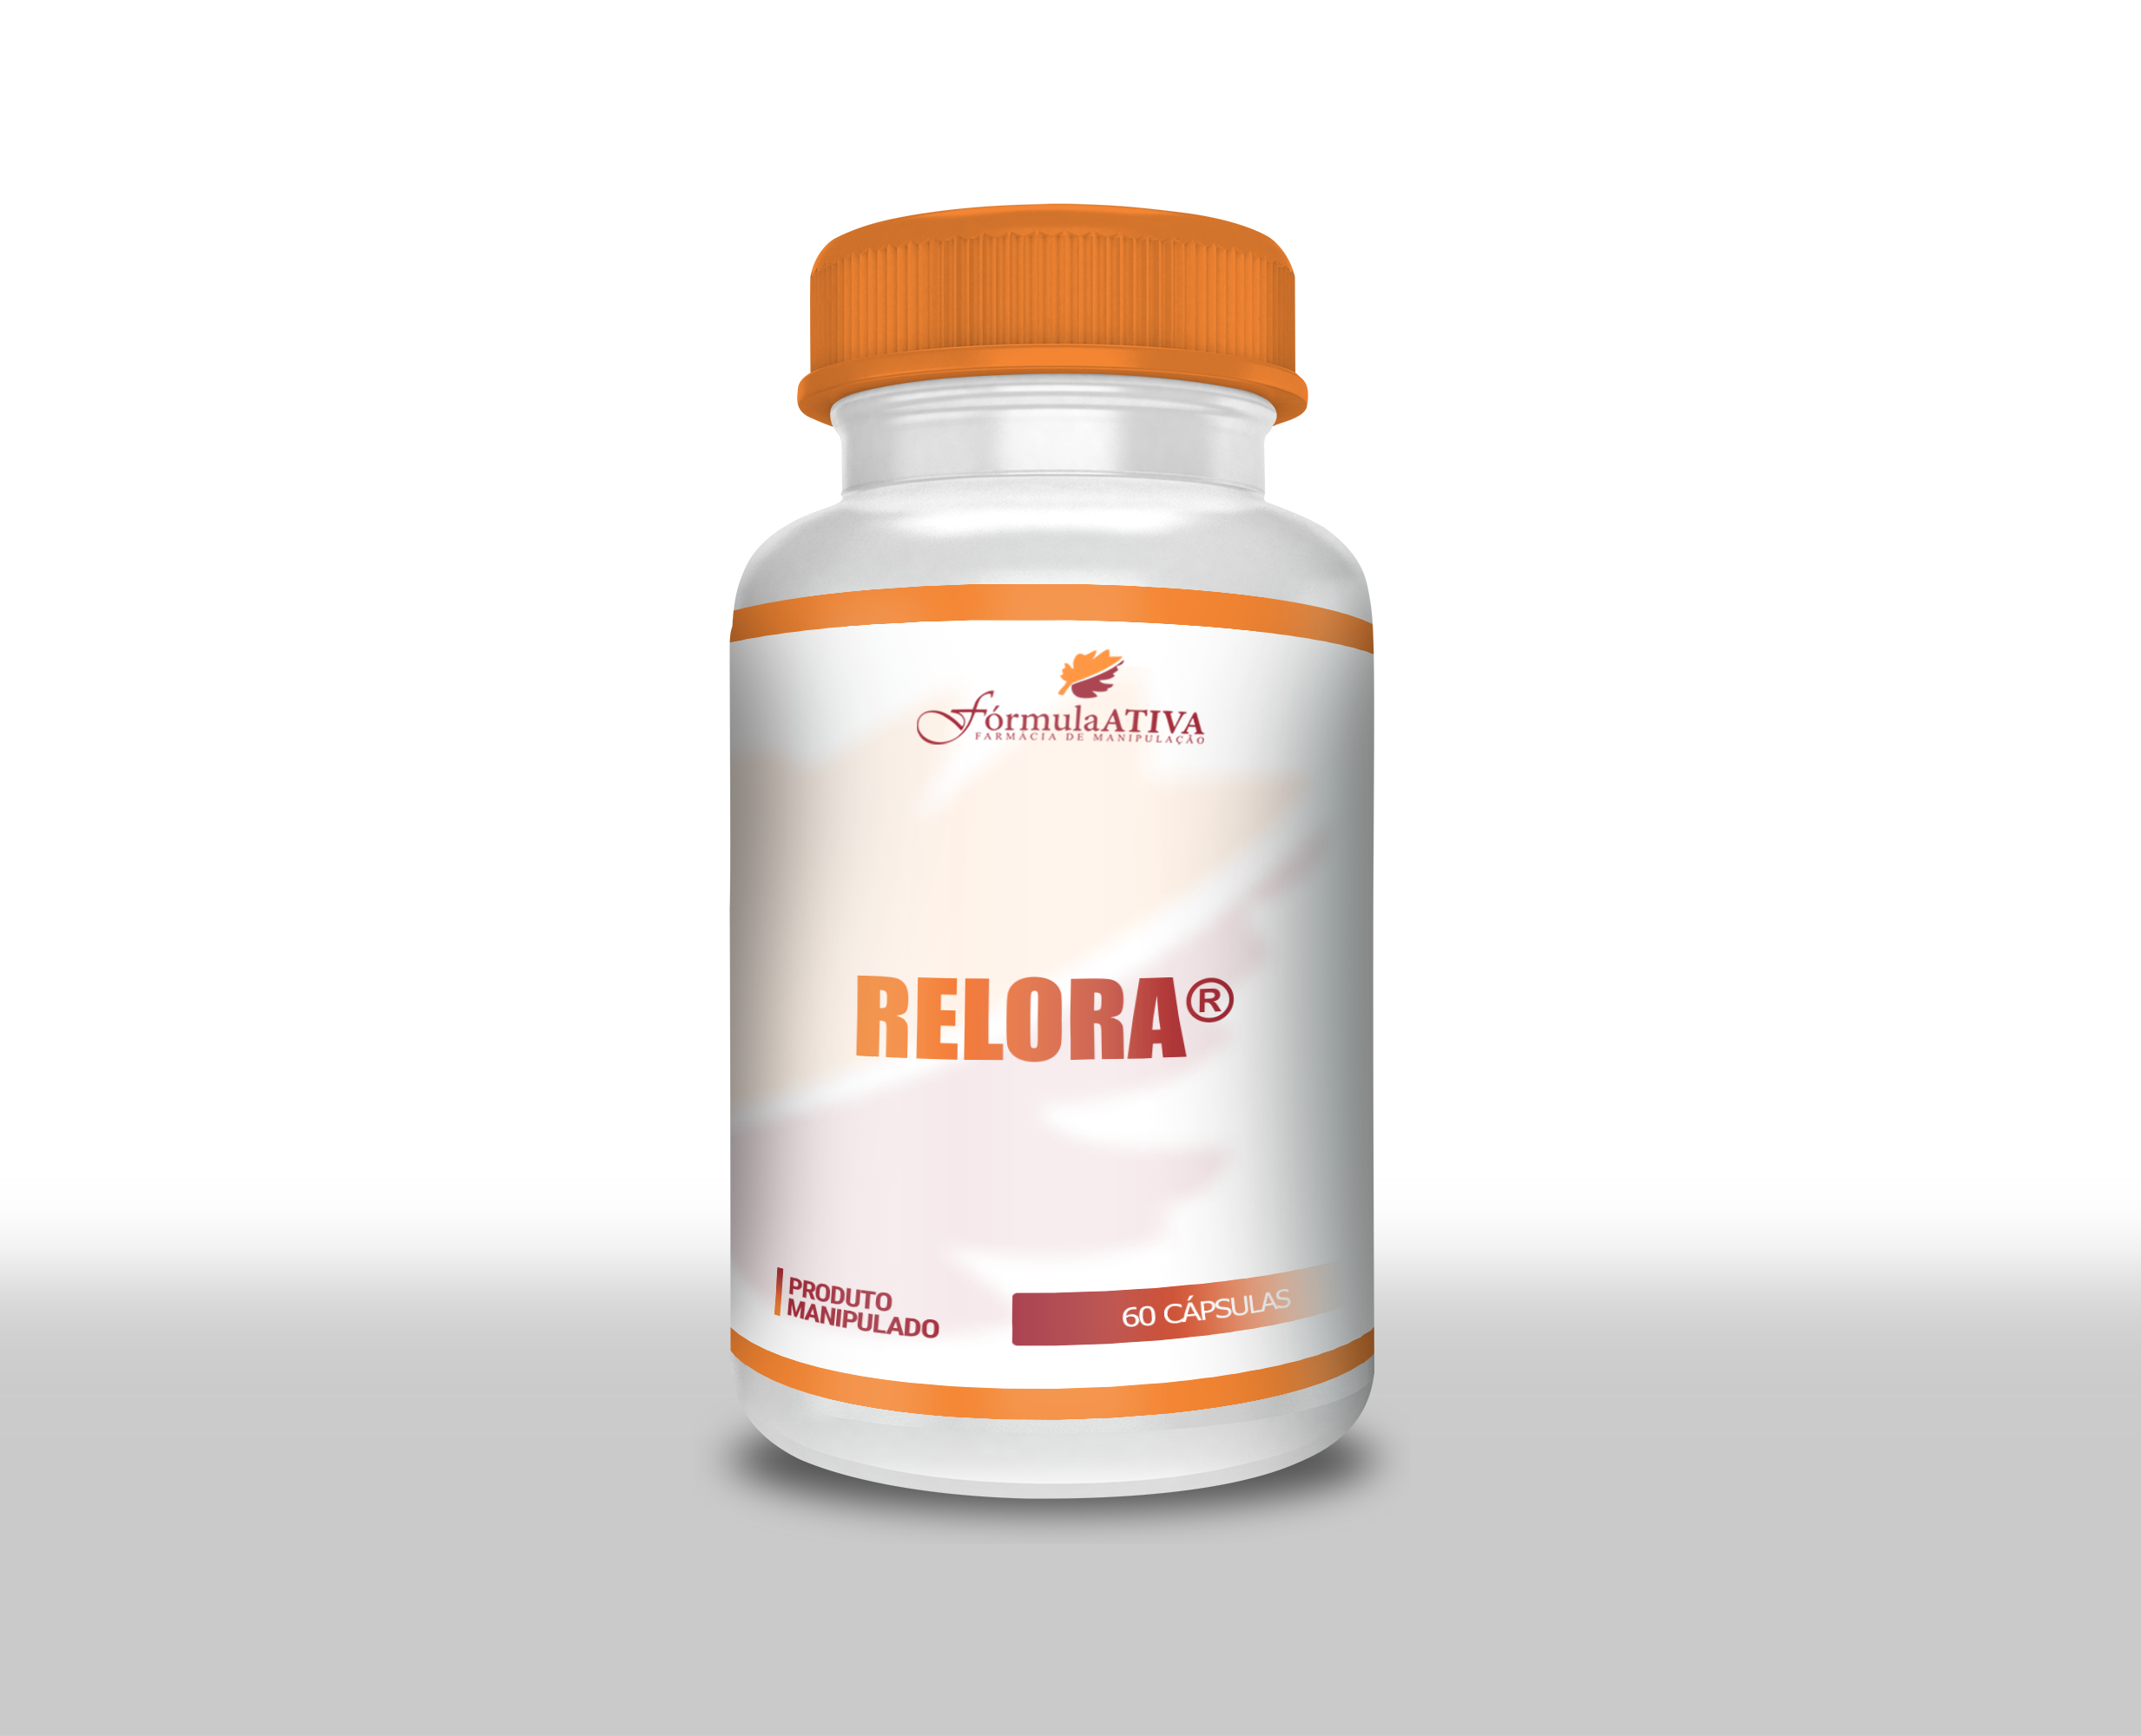 Relora (250mg - 60 doses)